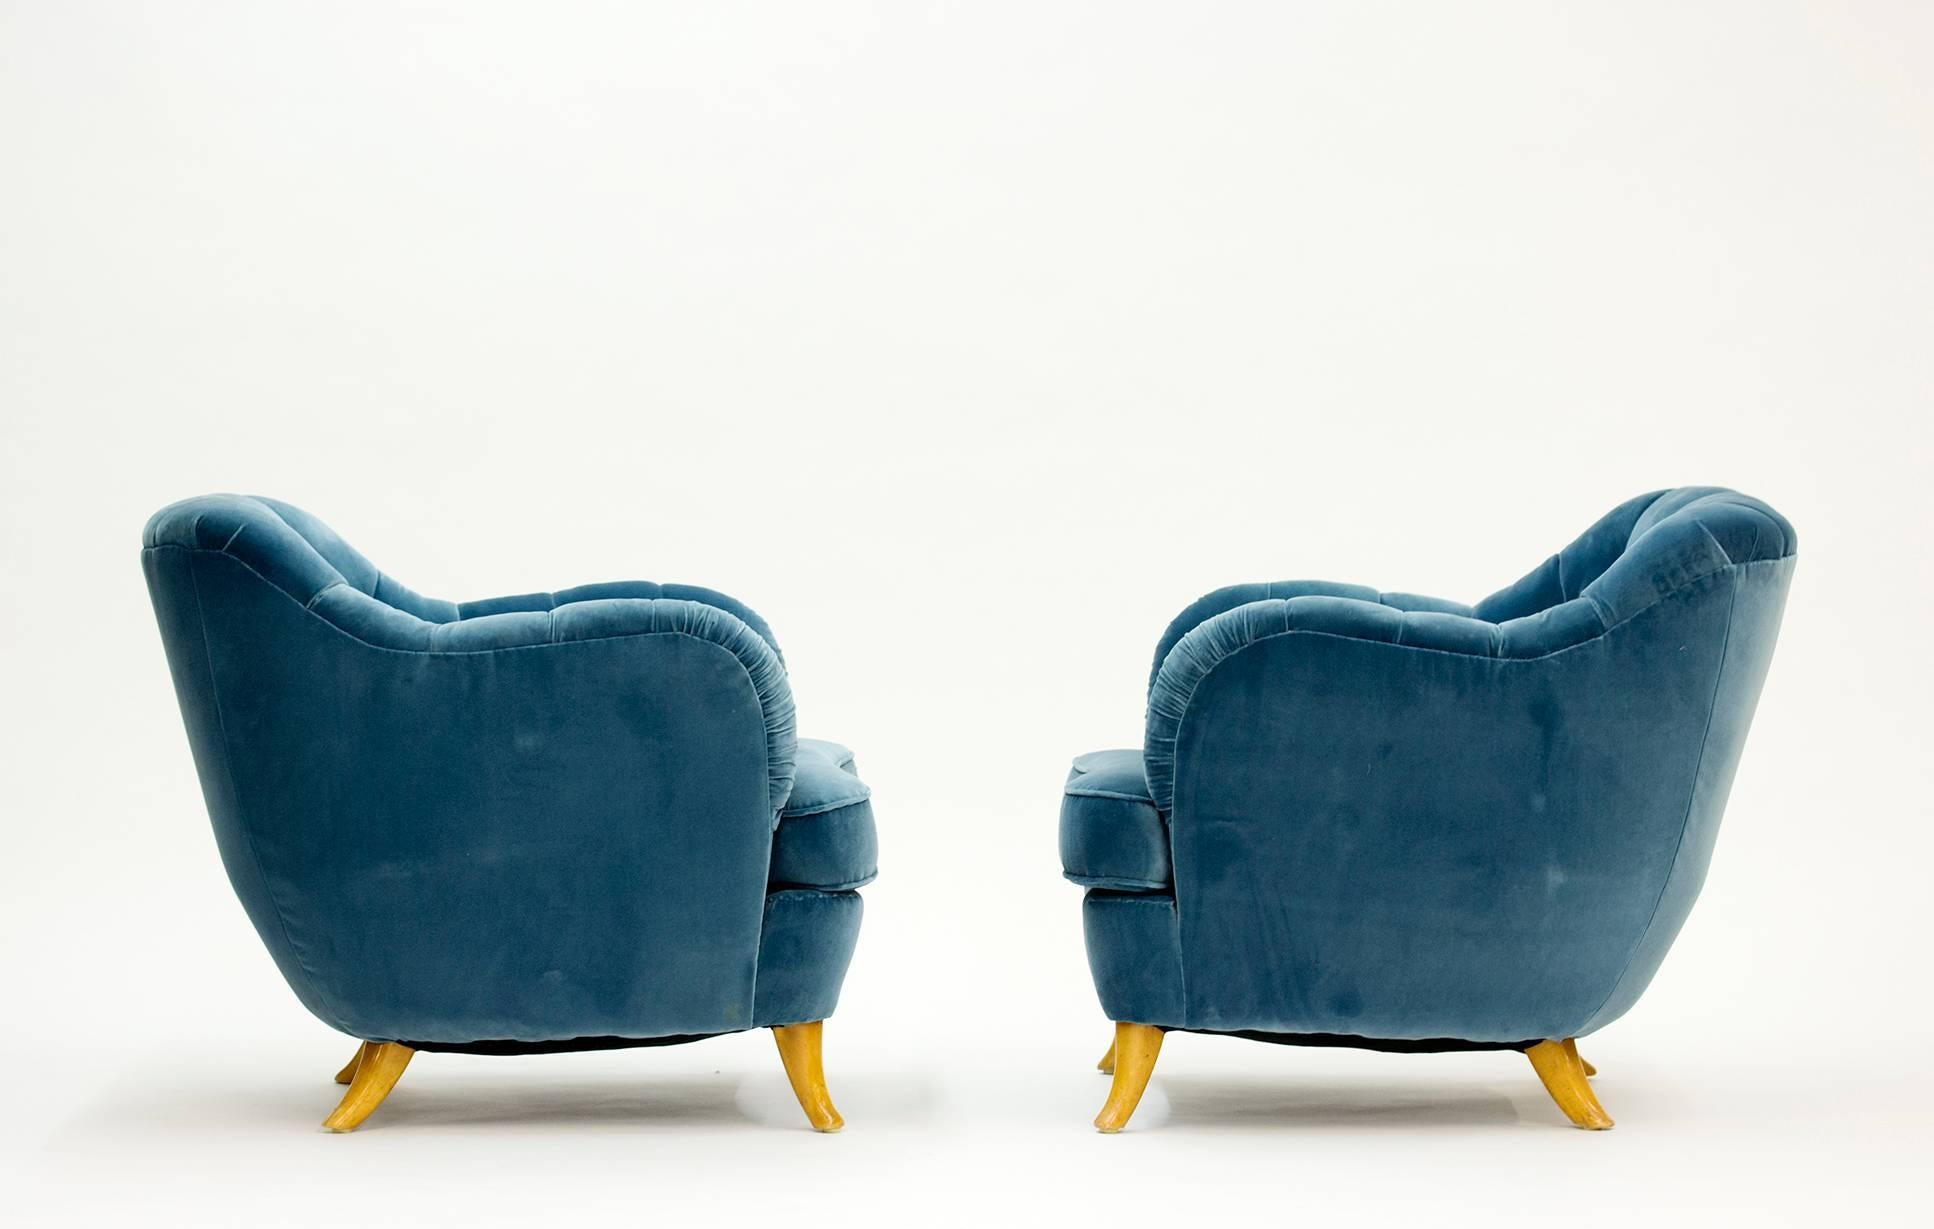 Pair of lounge chairs by Elias Svedberg for NK (Nordiska Kompaniet), upholstered with aquamarine velvet that enhances the refined lines and details of these deluxe chairs.

Elias Svedberg was an architect and designer with a long career at NK,